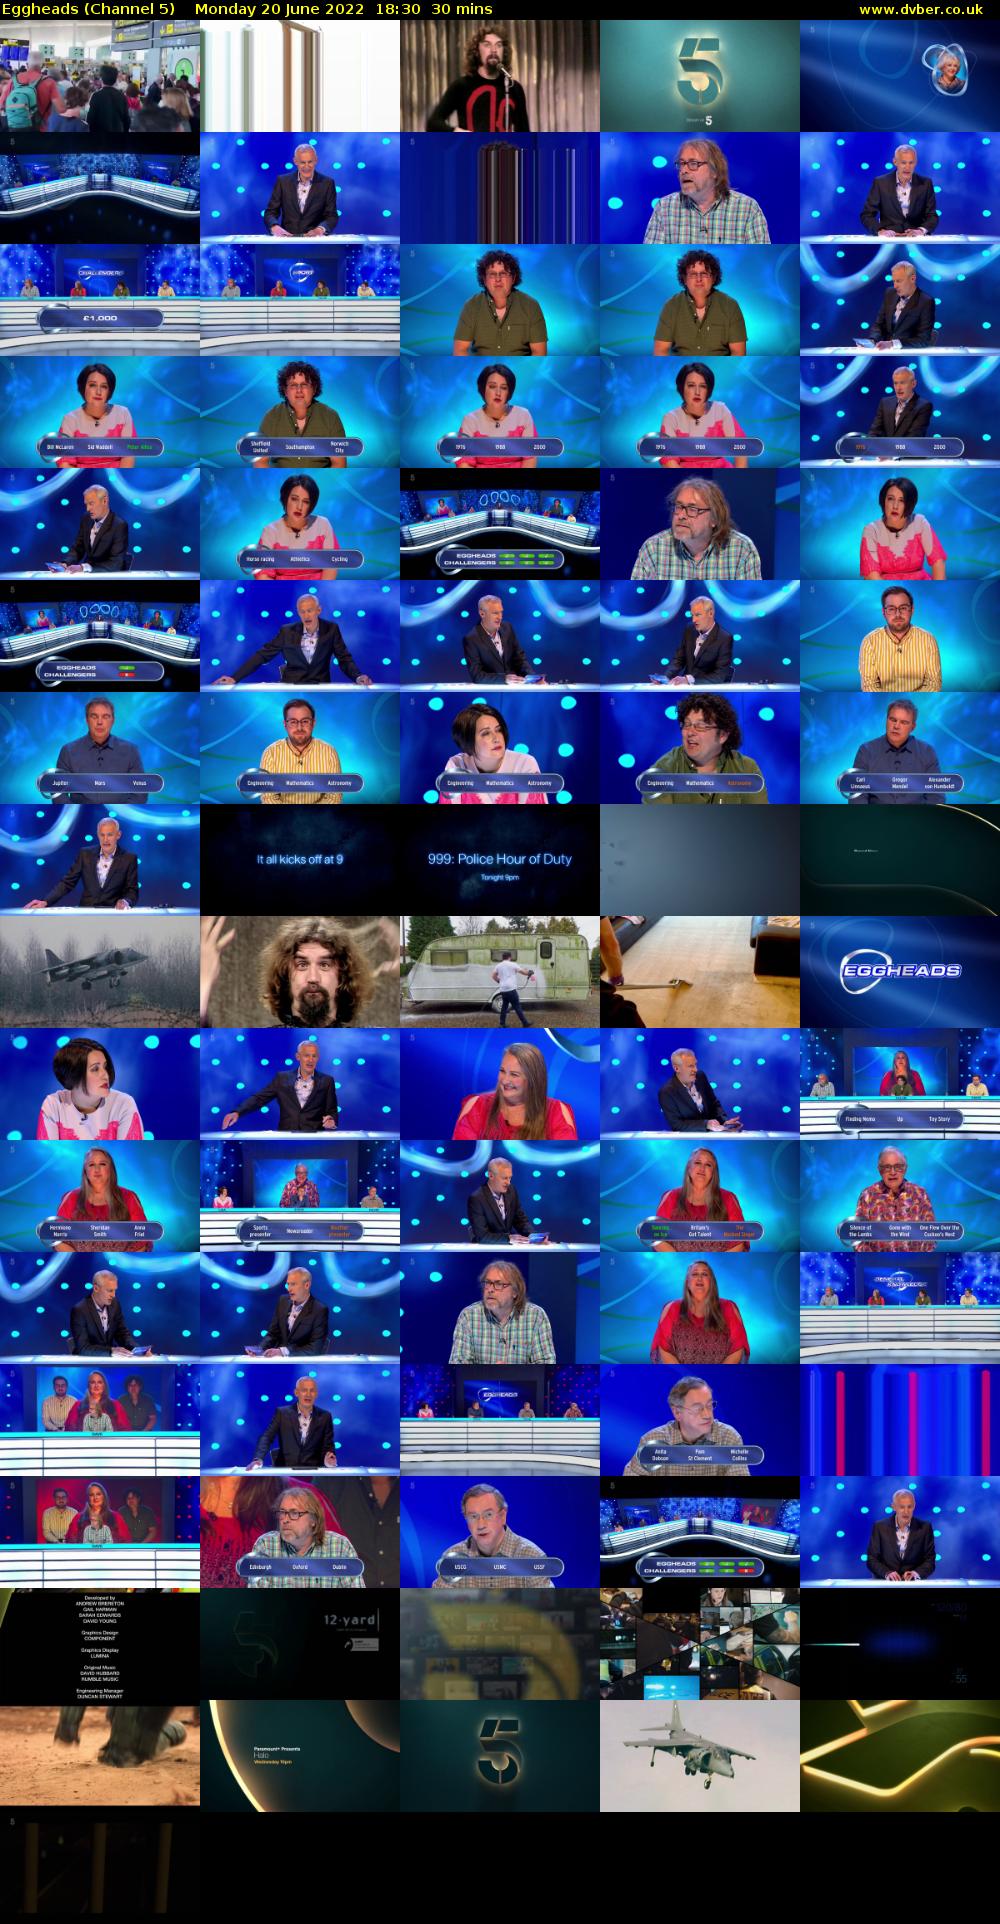 Eggheads (Channel 5) Monday 20 June 2022 18:30 - 19:00